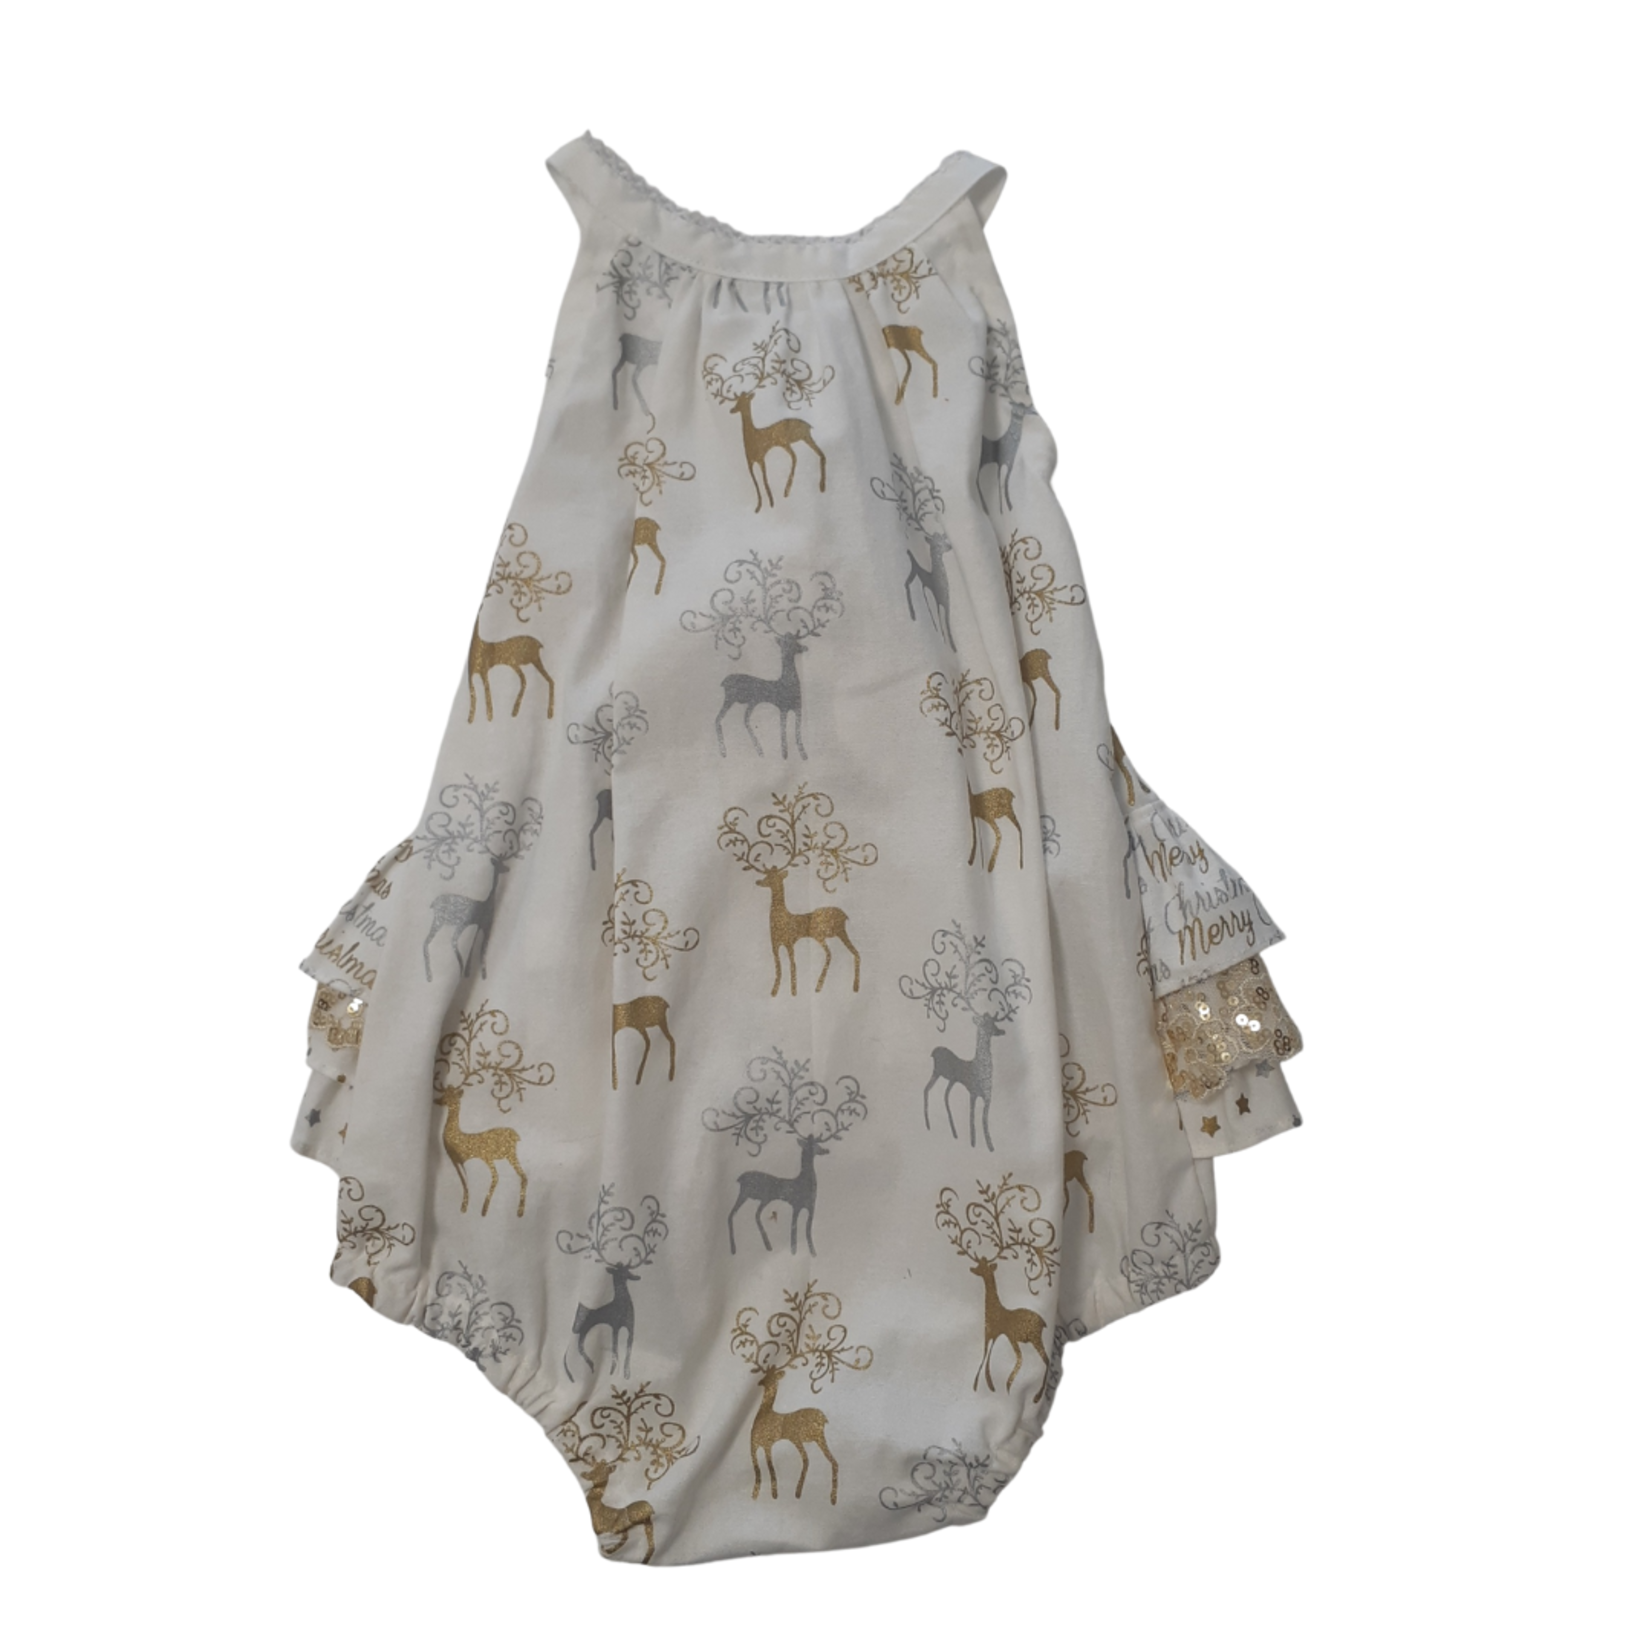 Penny's Pieces Penny's Pieces - Girls Deer Romper (Silver & Gold)